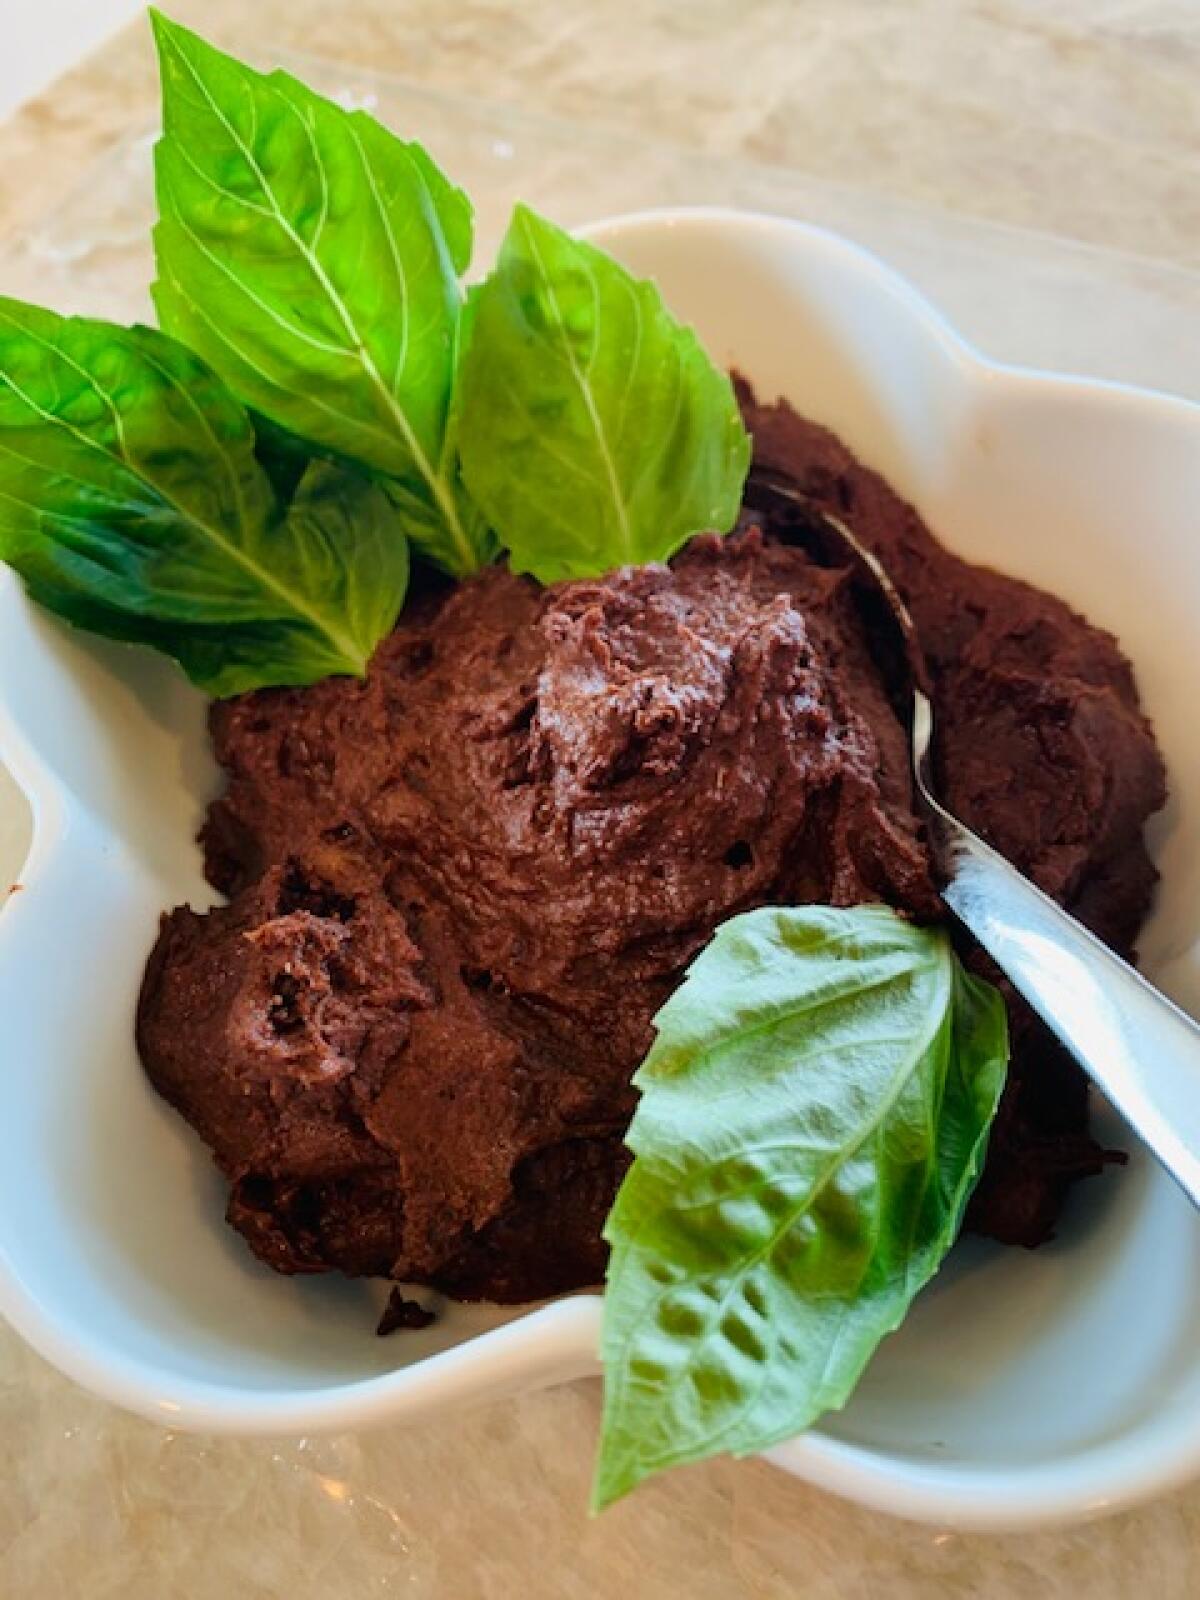 Tipsy Acorn Chocolate Mousse garnished with fresh basil leaves